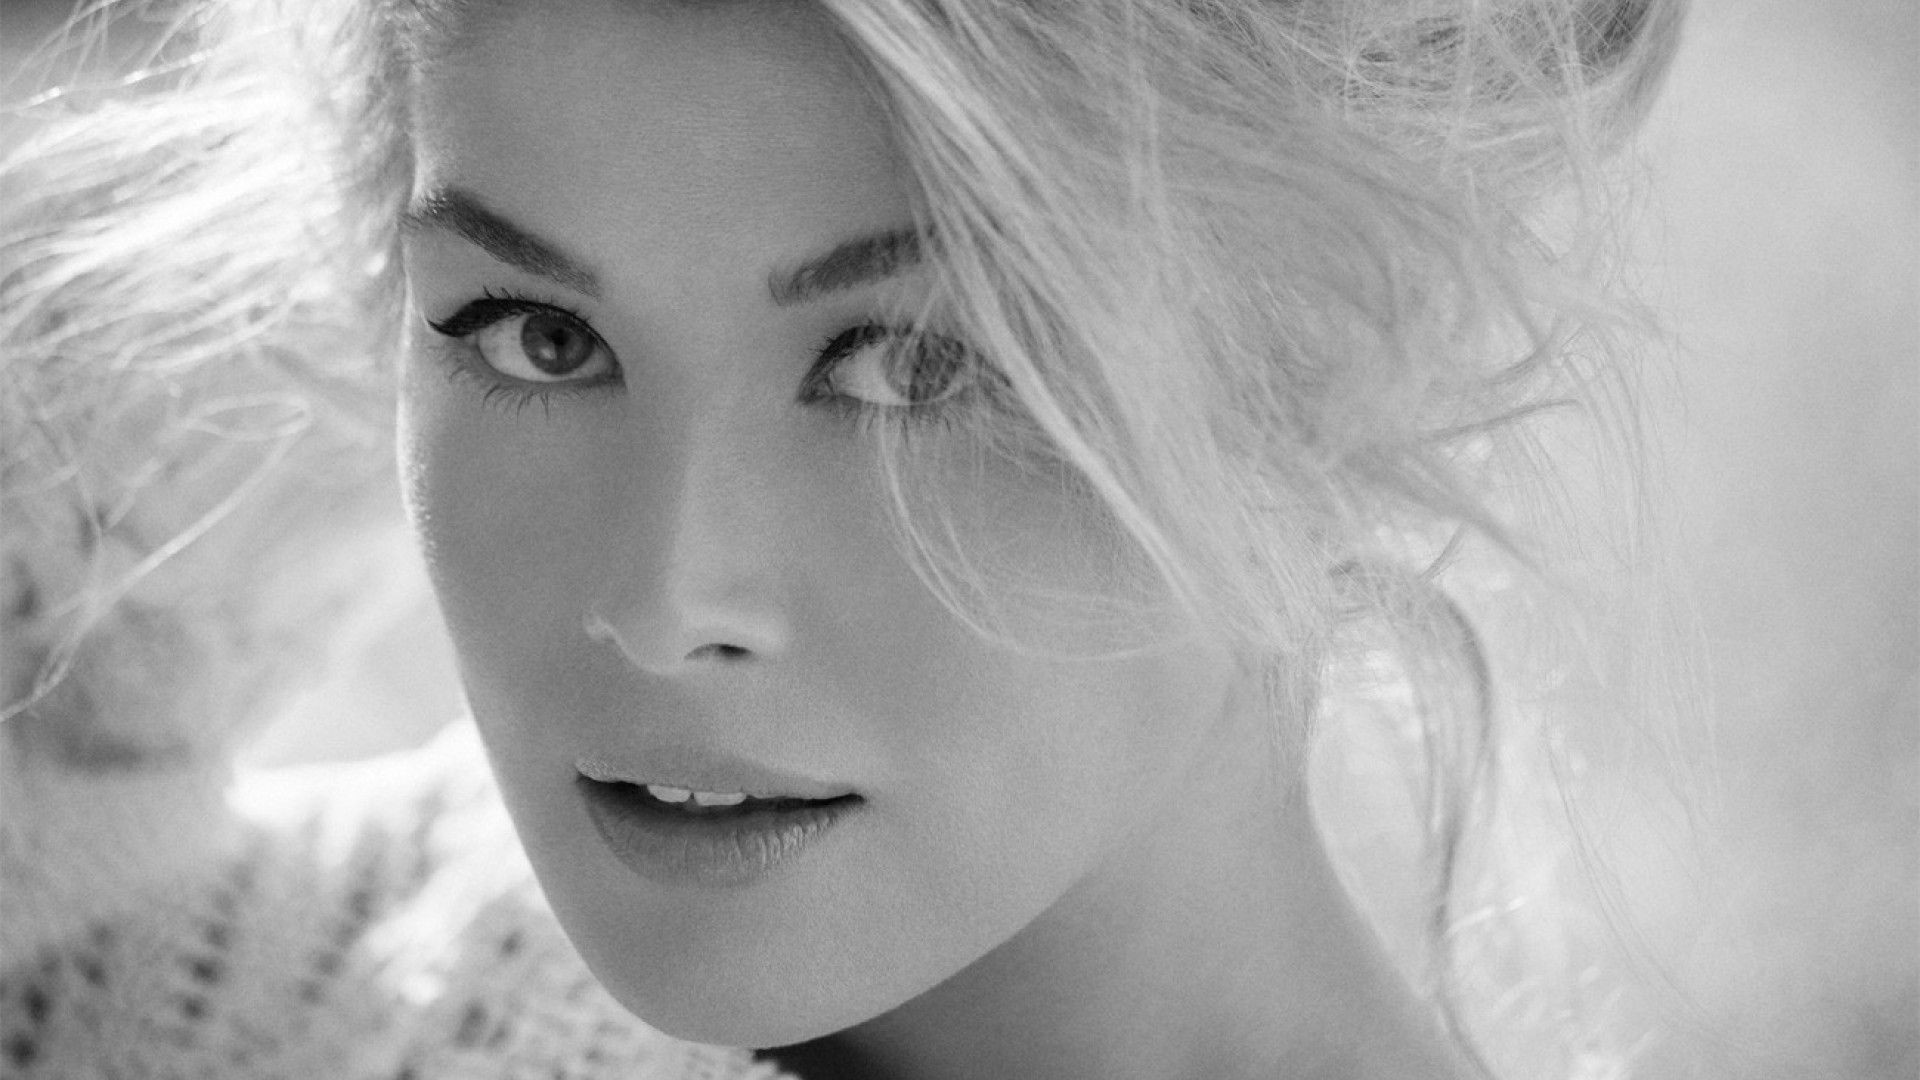 rosamund-pike-cute-beauty-english-actress-wallpaper-images-background-1n53ic